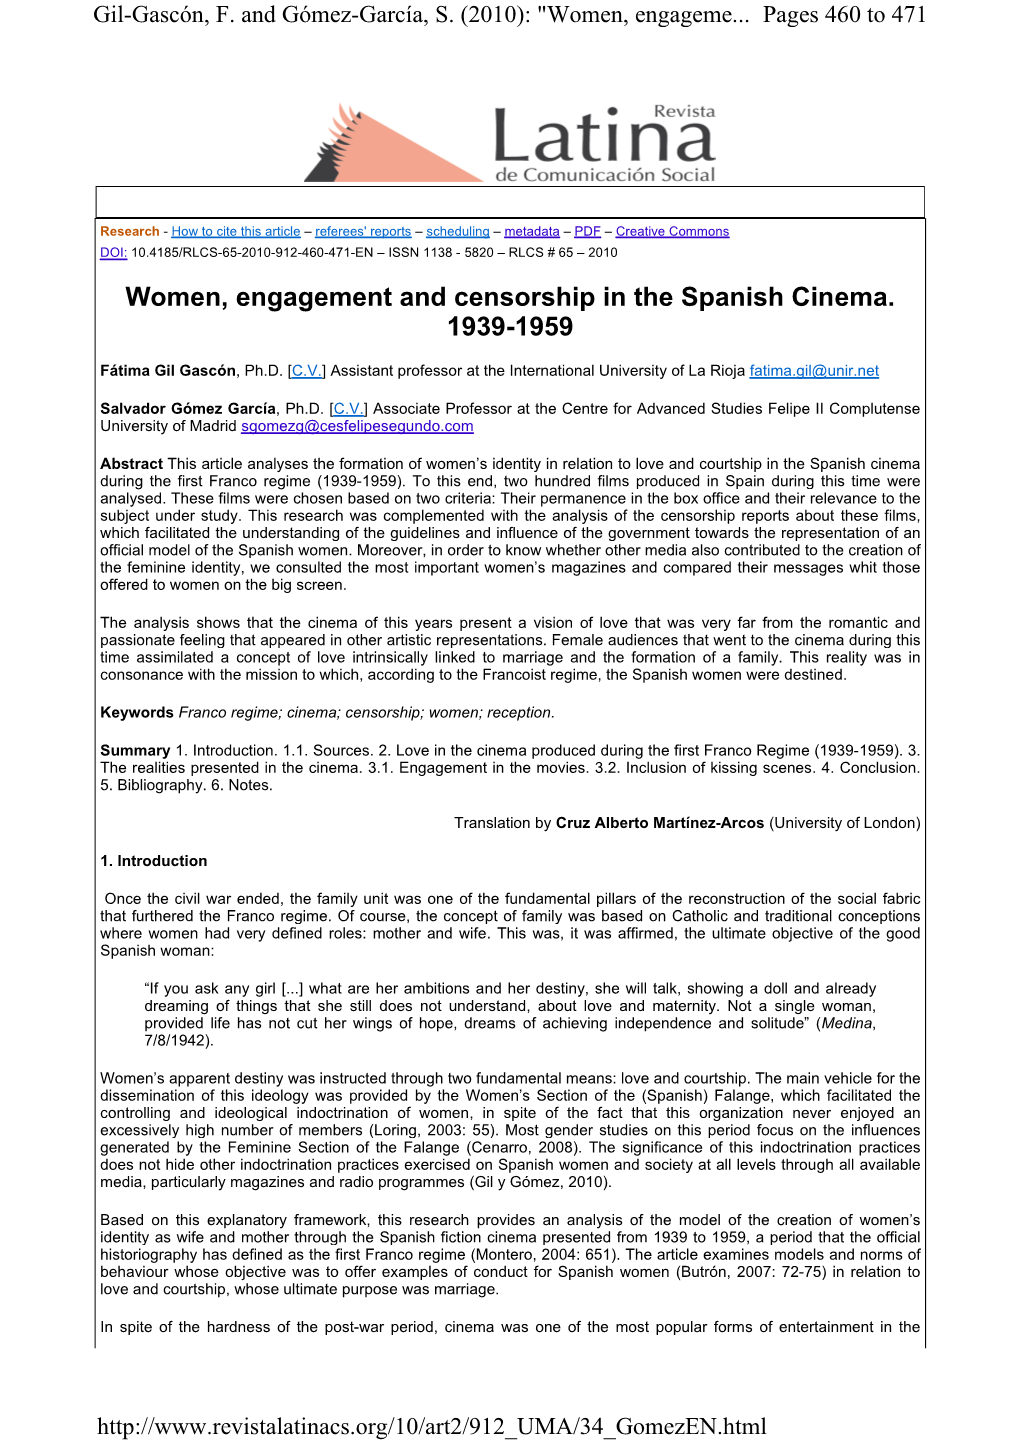 Women, Engagement and Censorship in the Spanish Cinema. 1939-1959